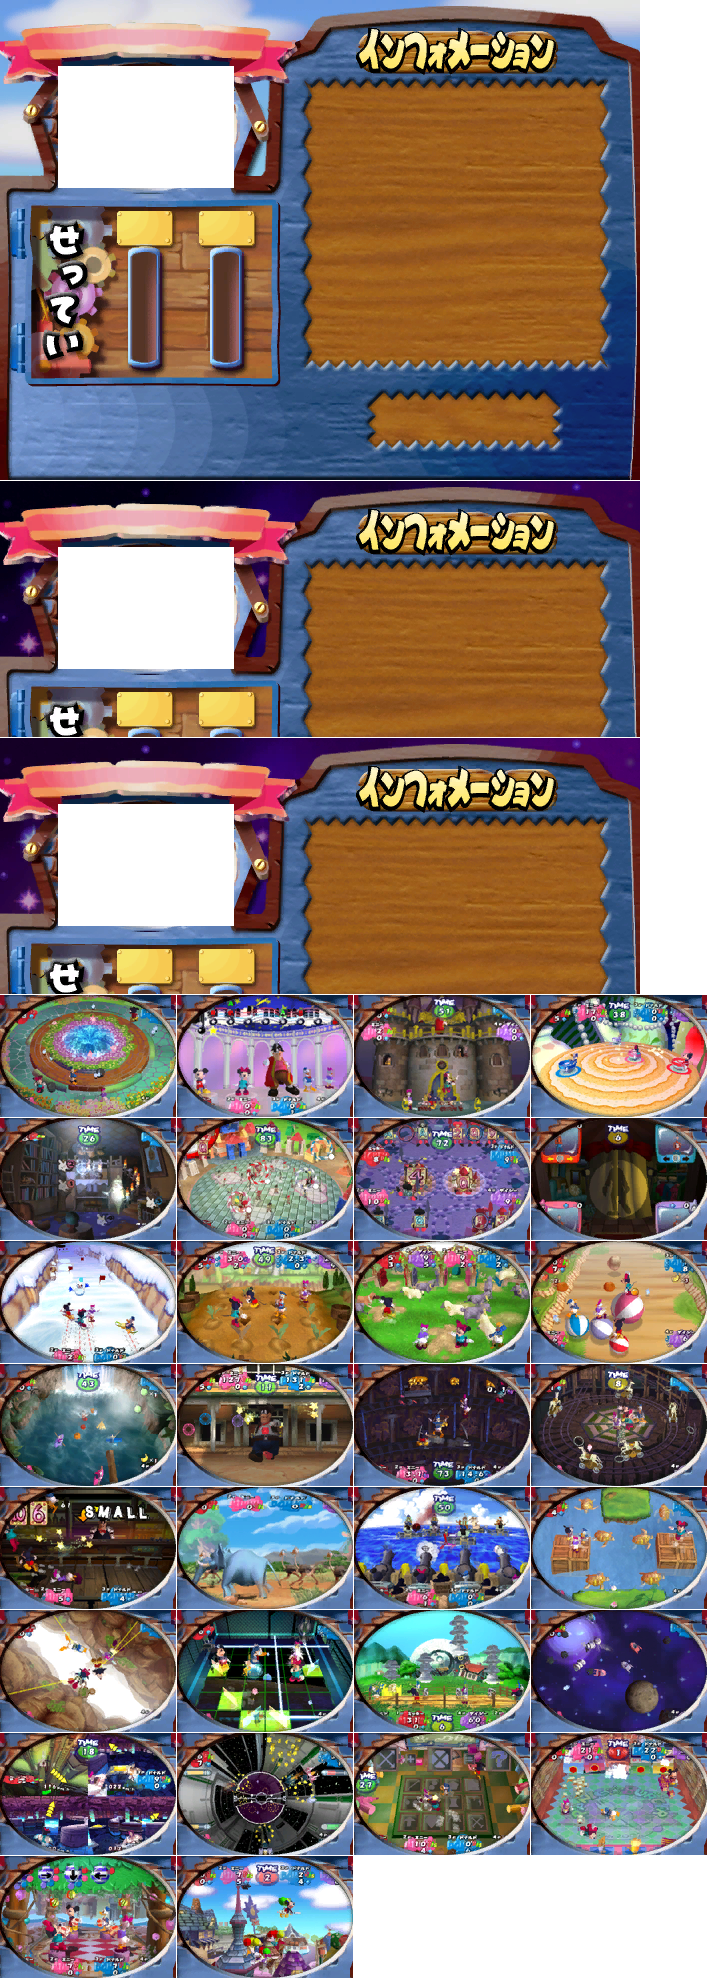 Disney's Party - Minigame Information Screen (Japan)